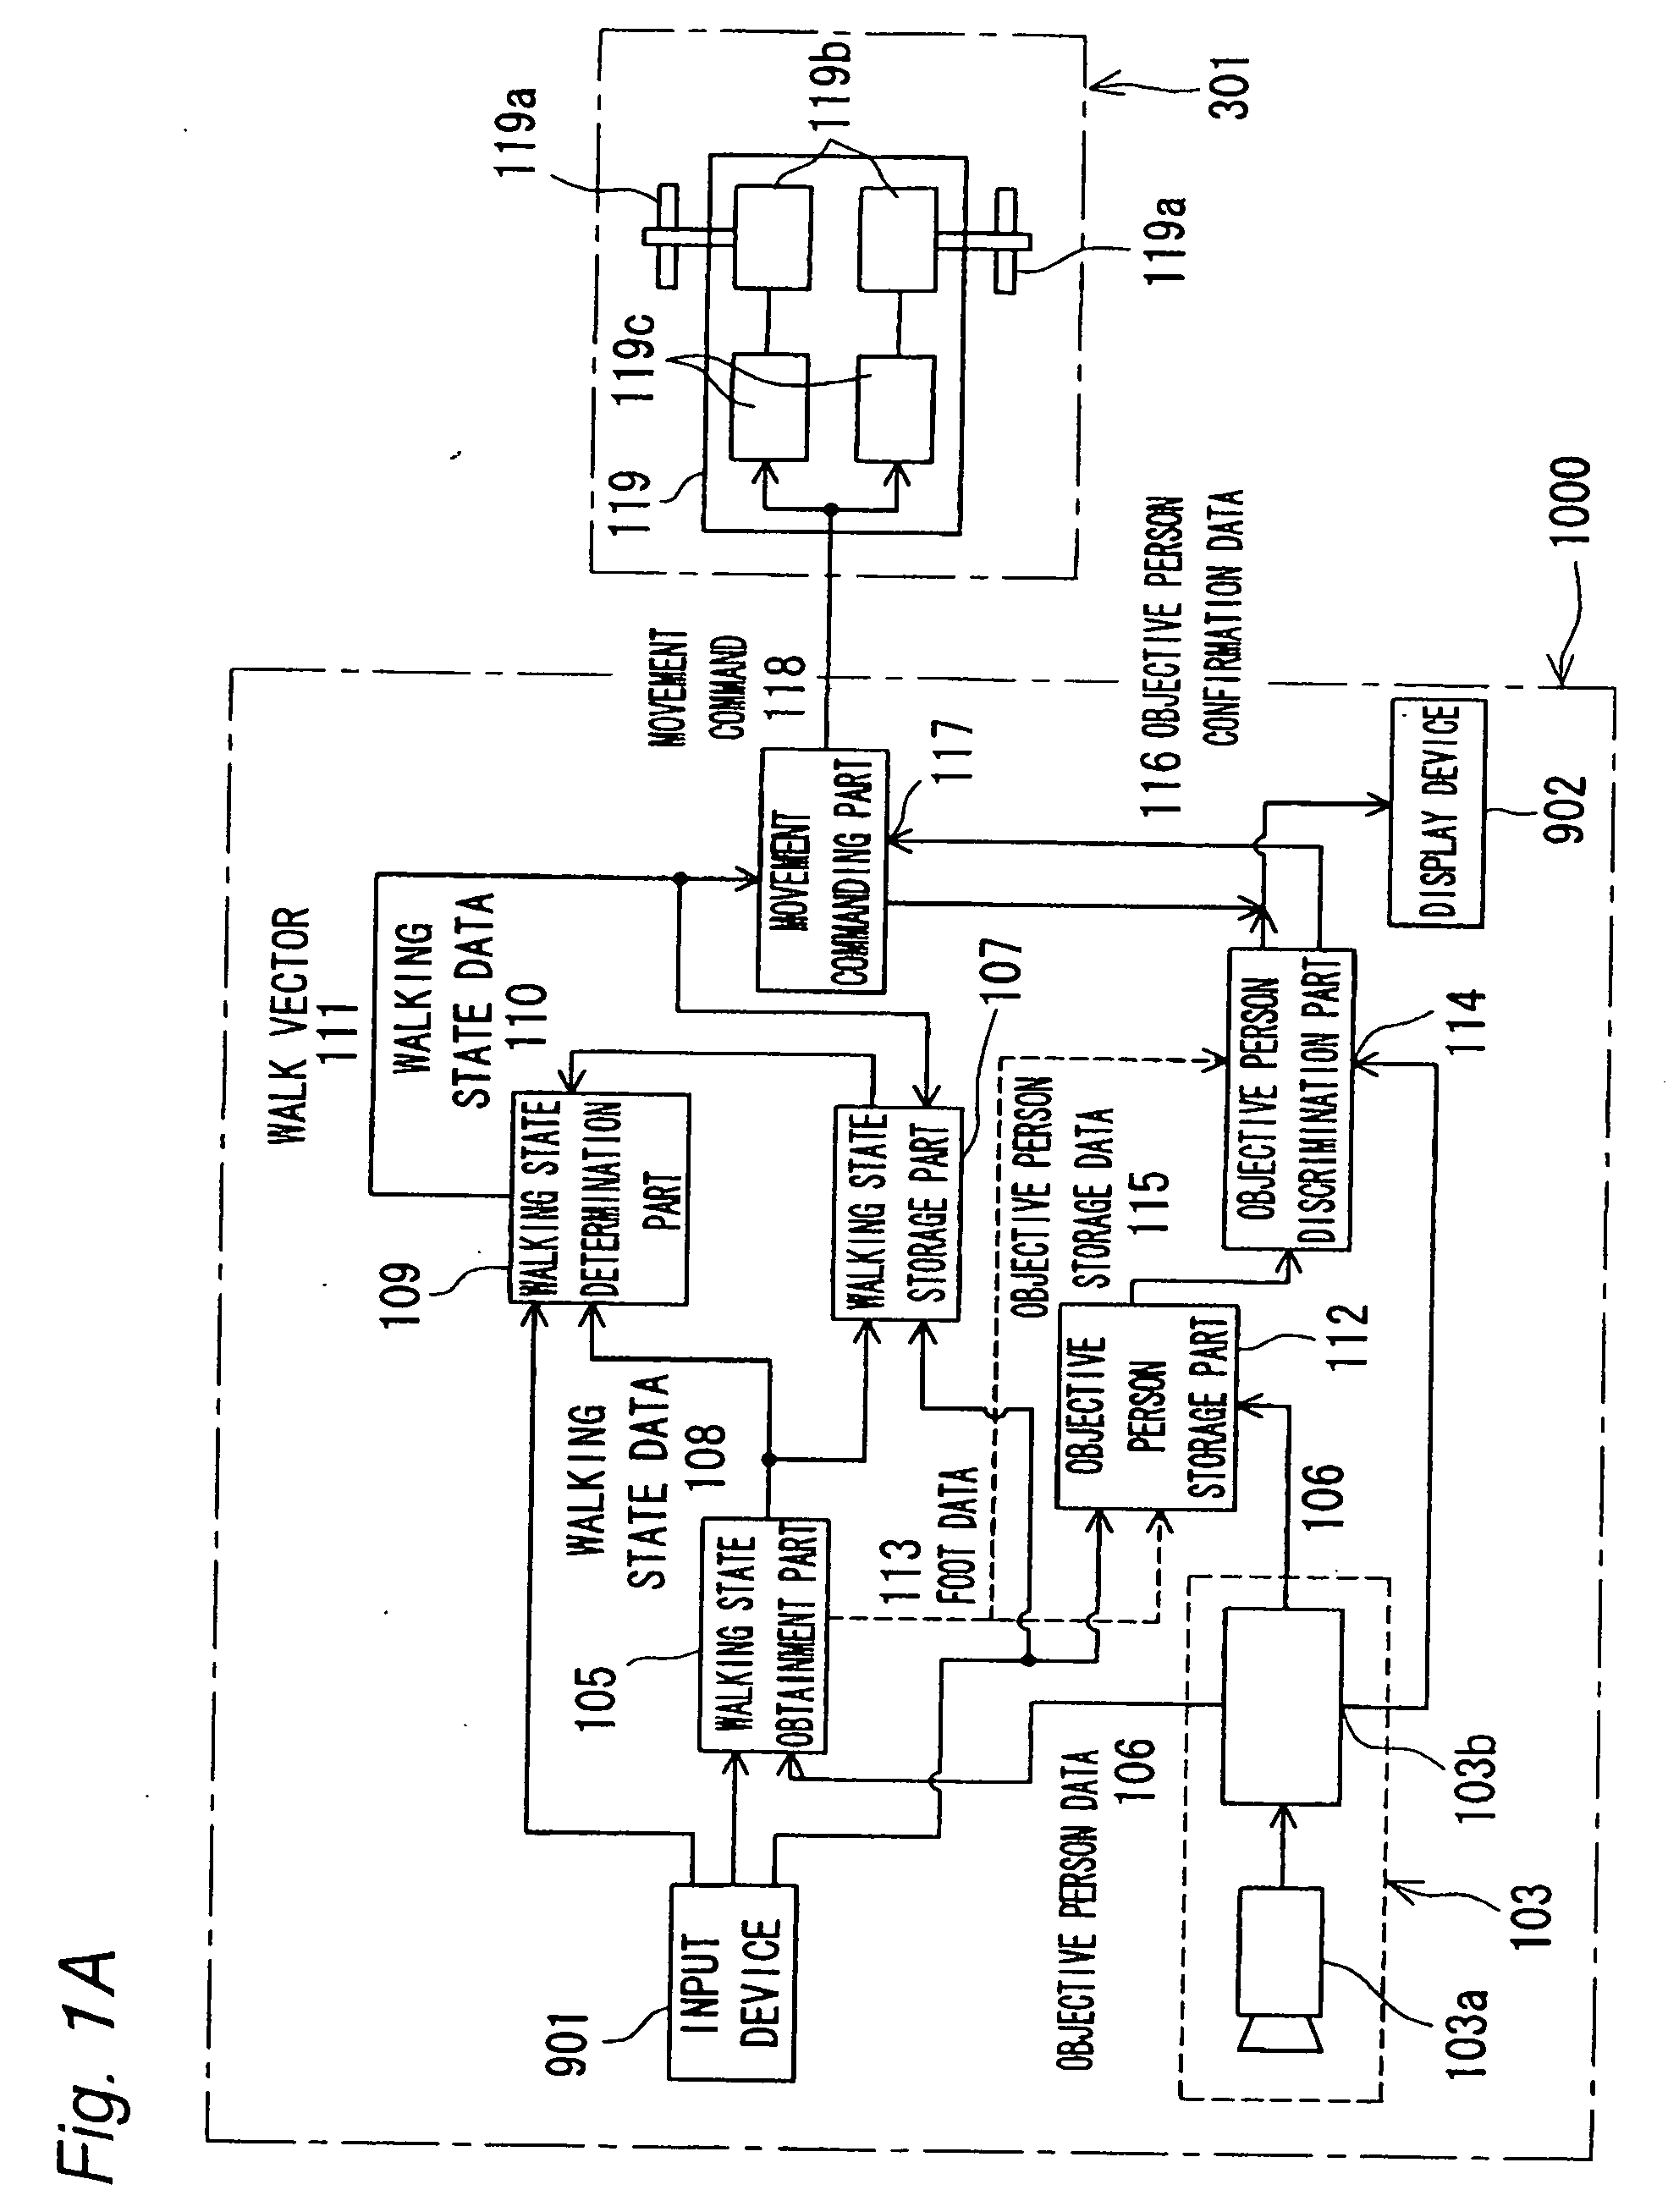 Method for making mobile unit accompany objective person